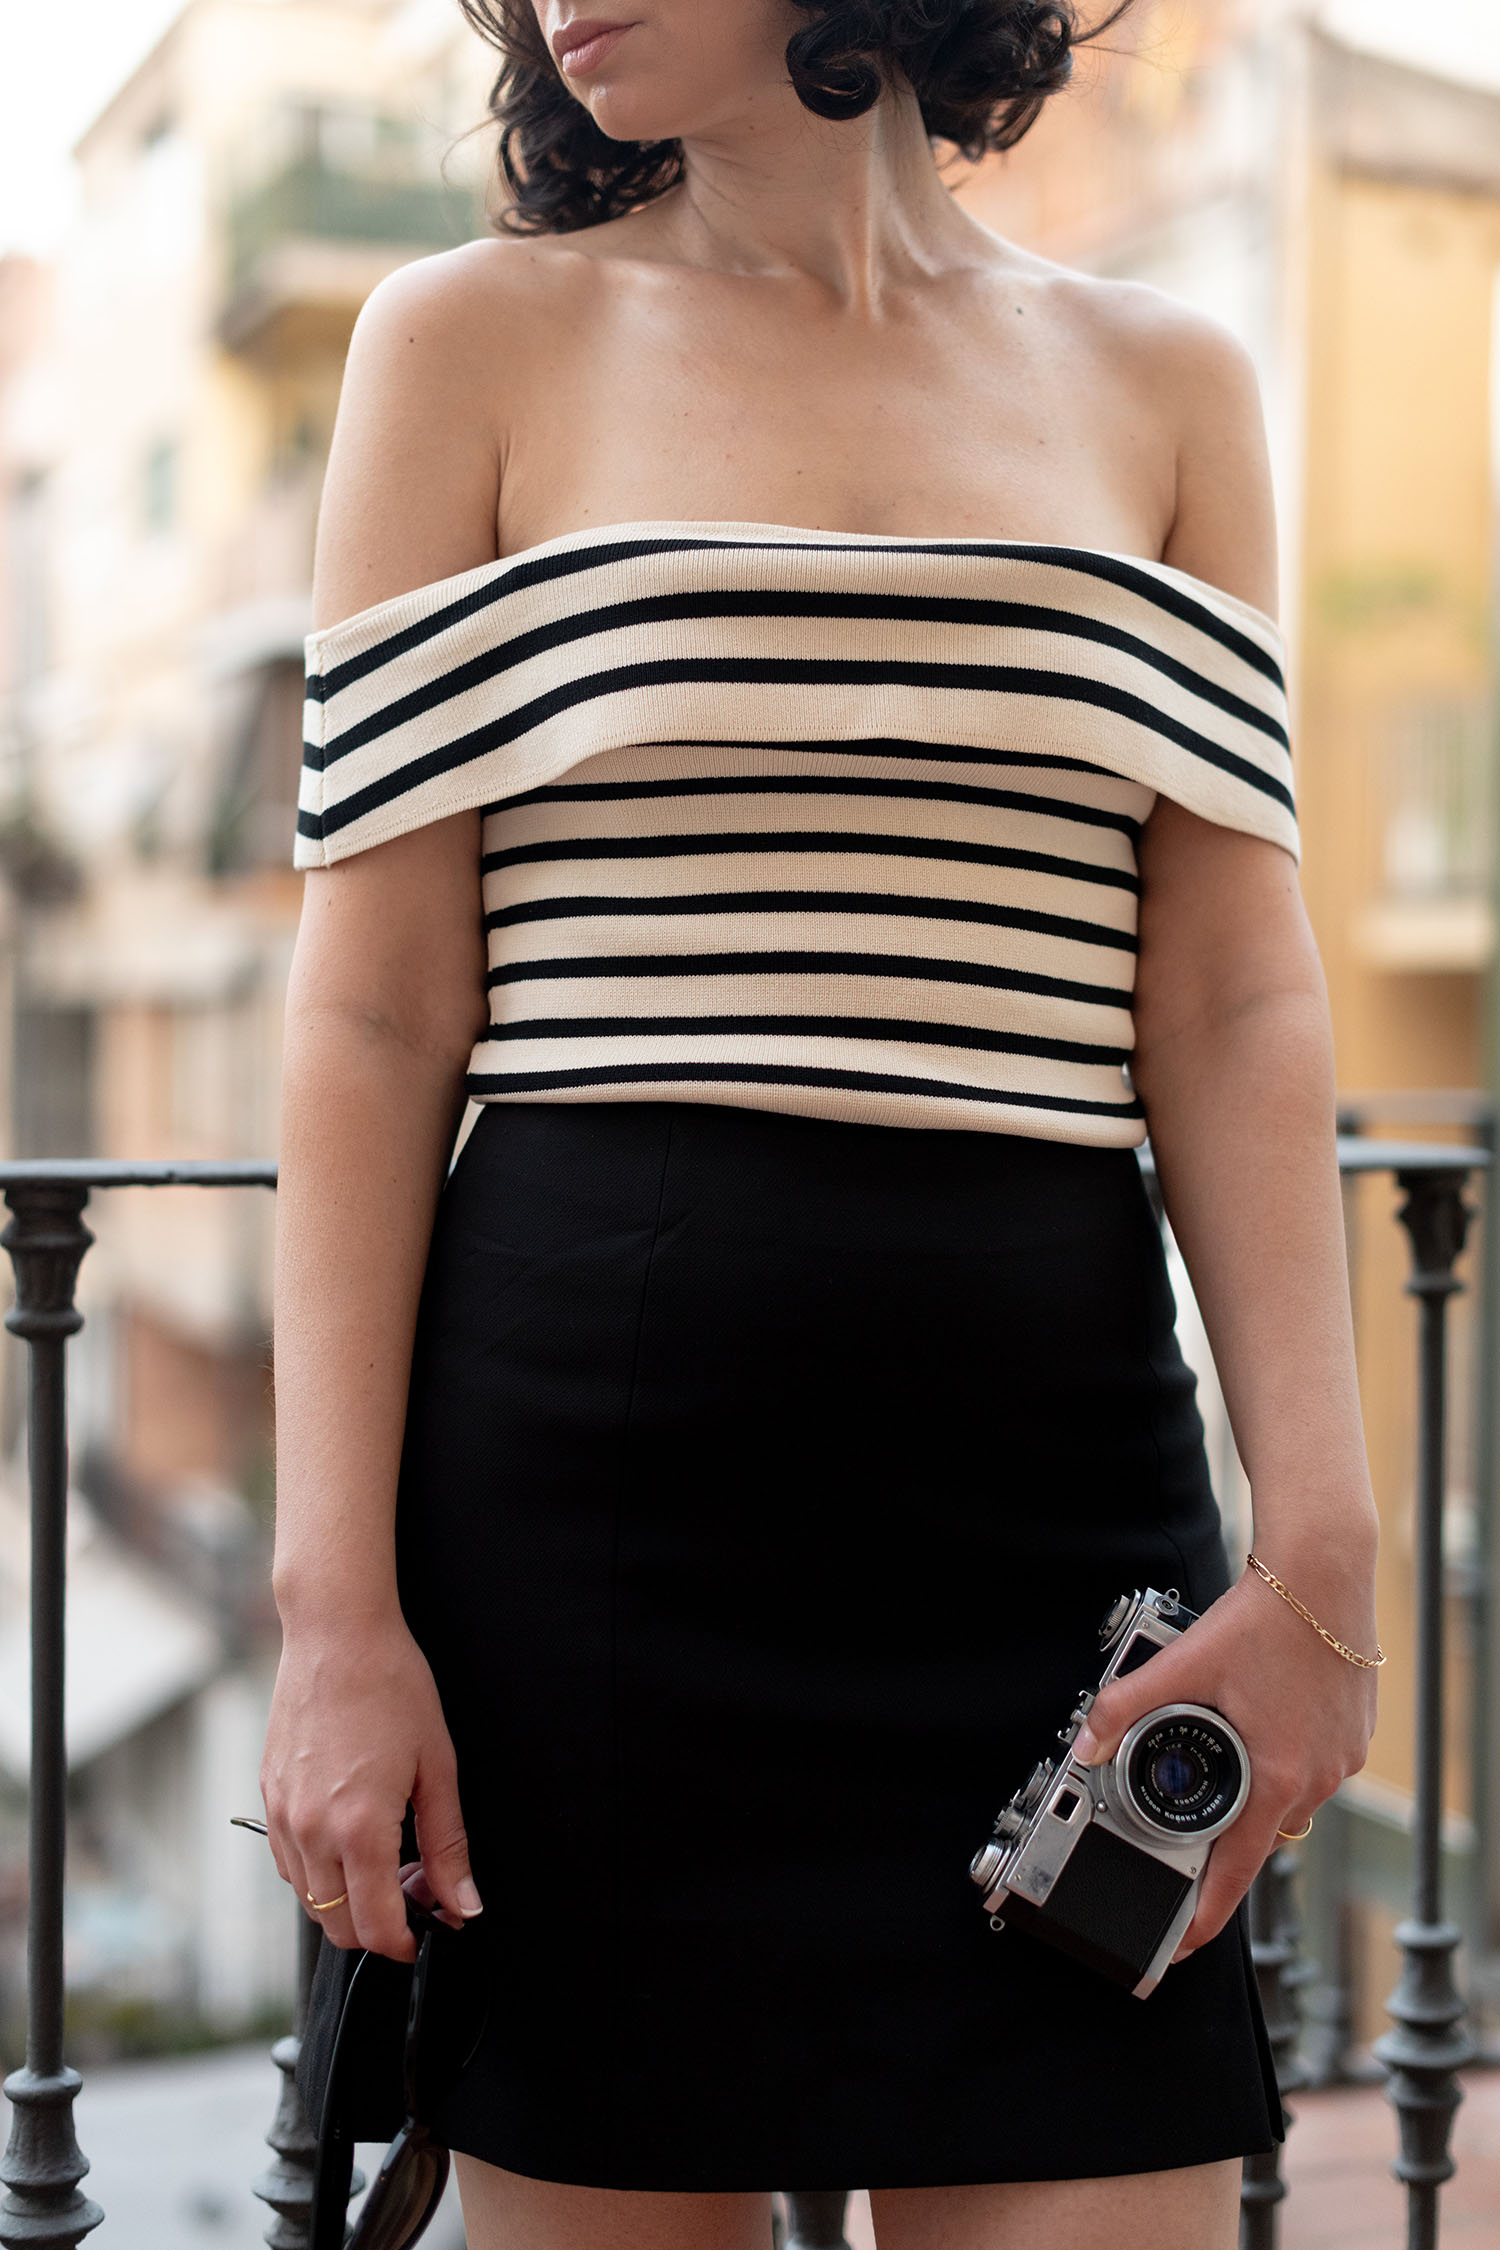 Coco & Voltaire - Zara striped top, & Other Stories skirt, Vintage Nikon camera